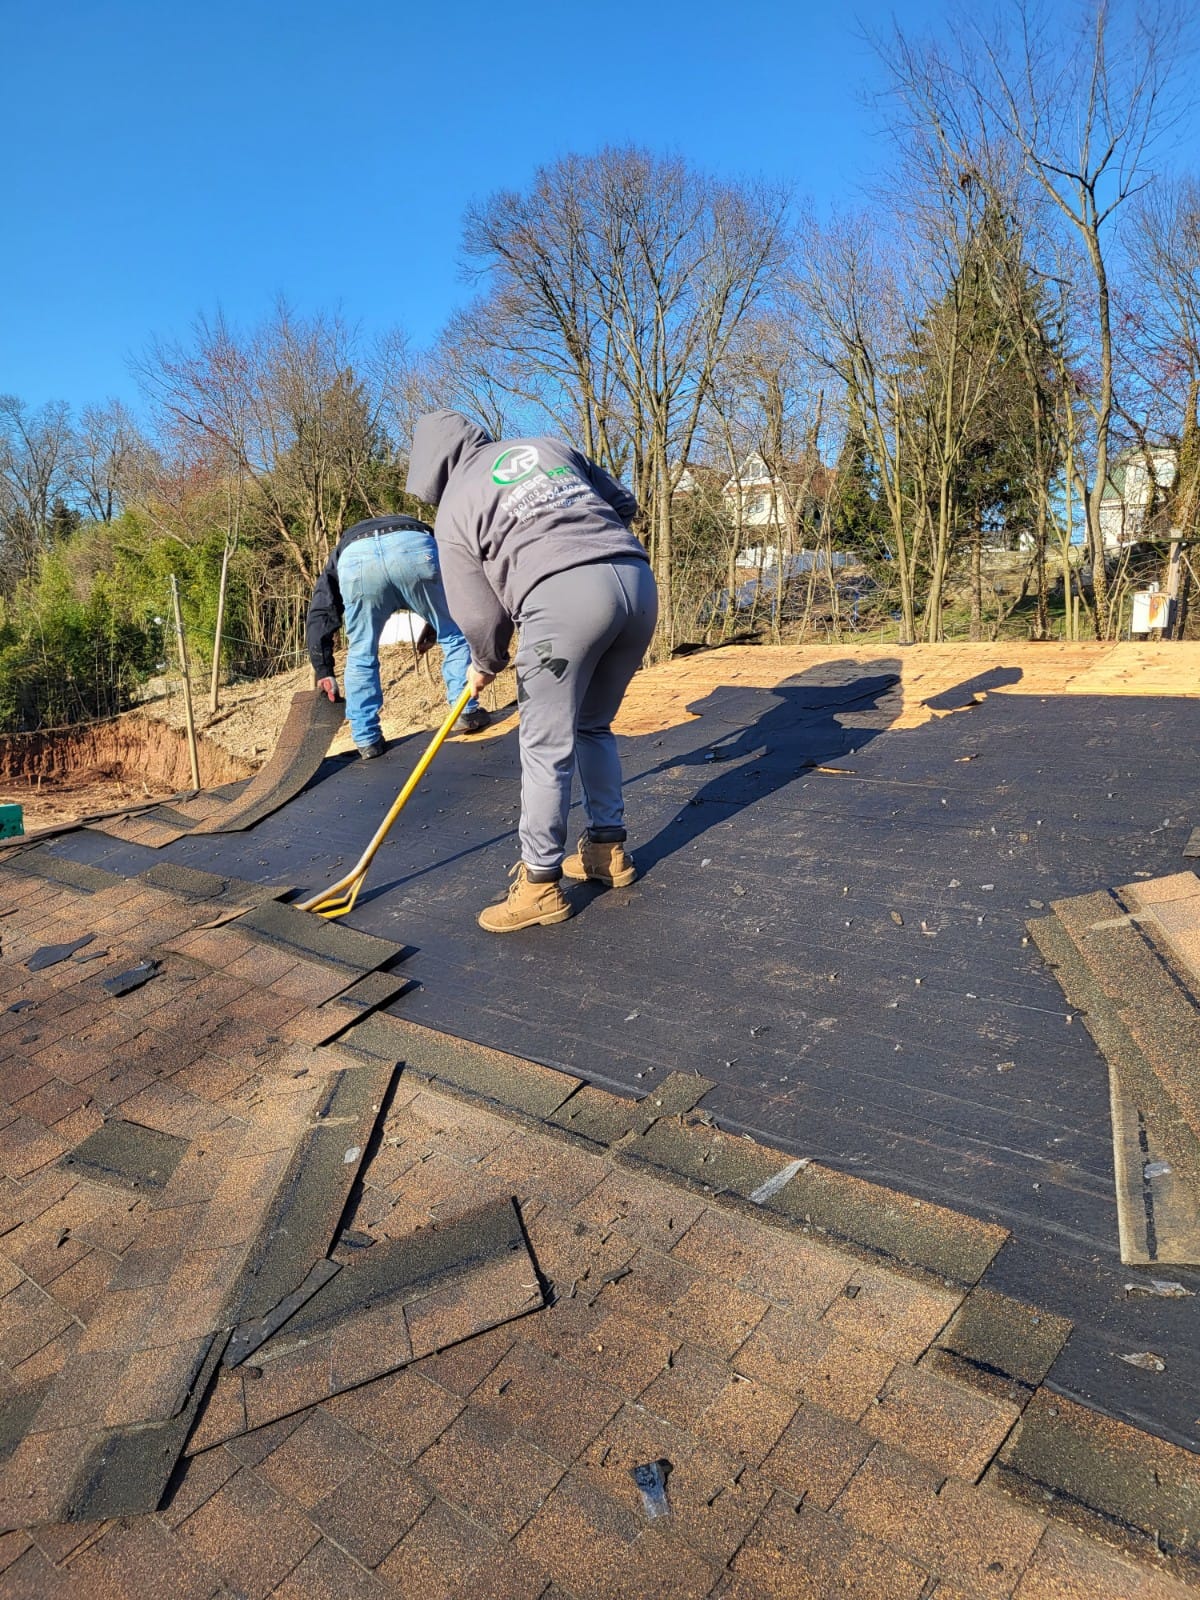 Mega Pro Roofing: Unbeatable Offer in Union County, NJ – No Frills, Just Pure Value